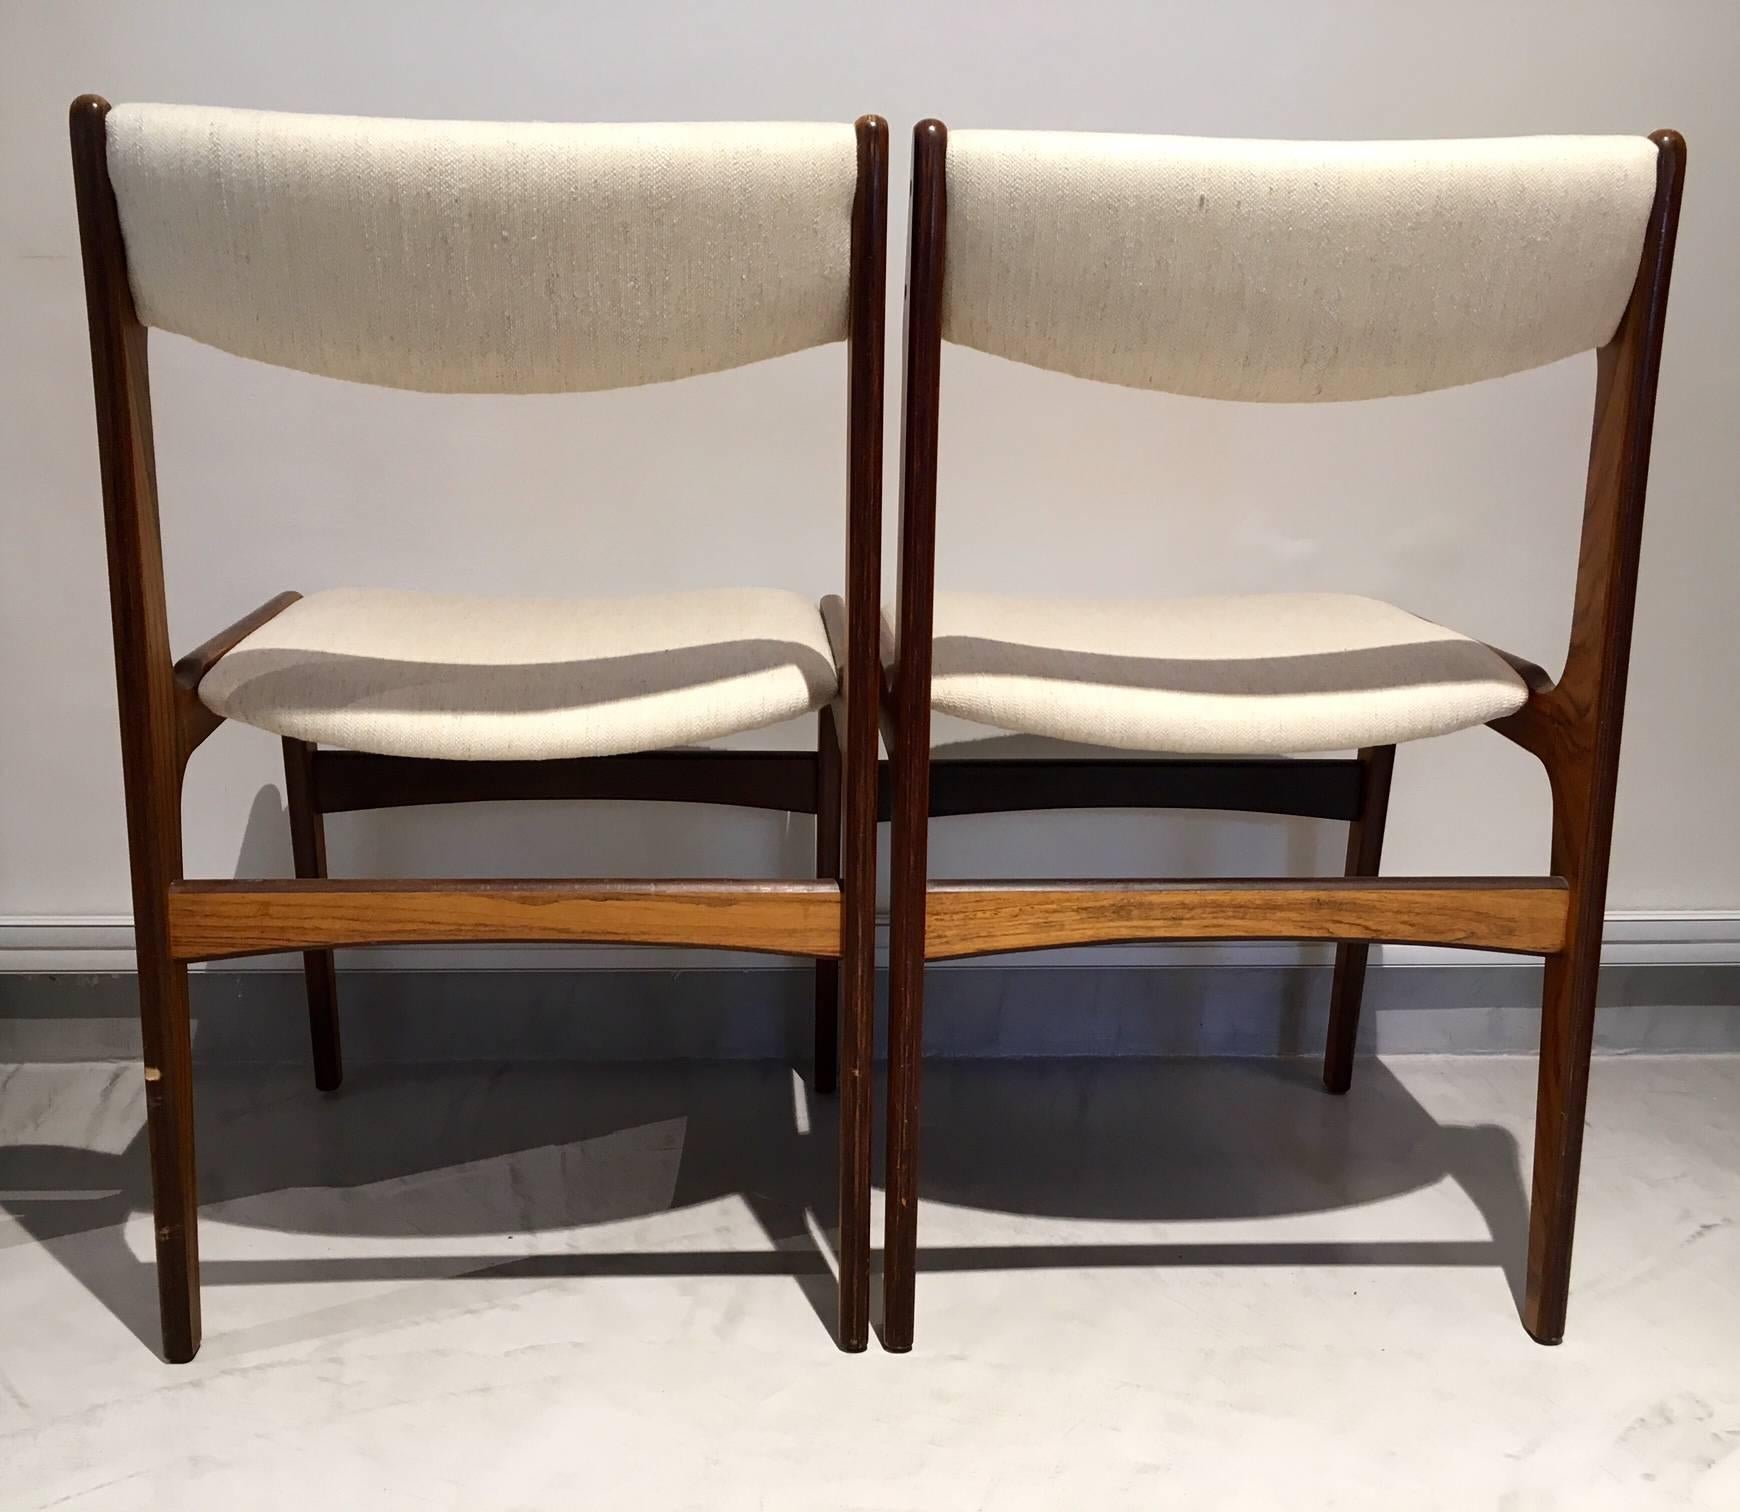 Set of Six Danish Modern Wooden Dining Chairs with White Covers 1